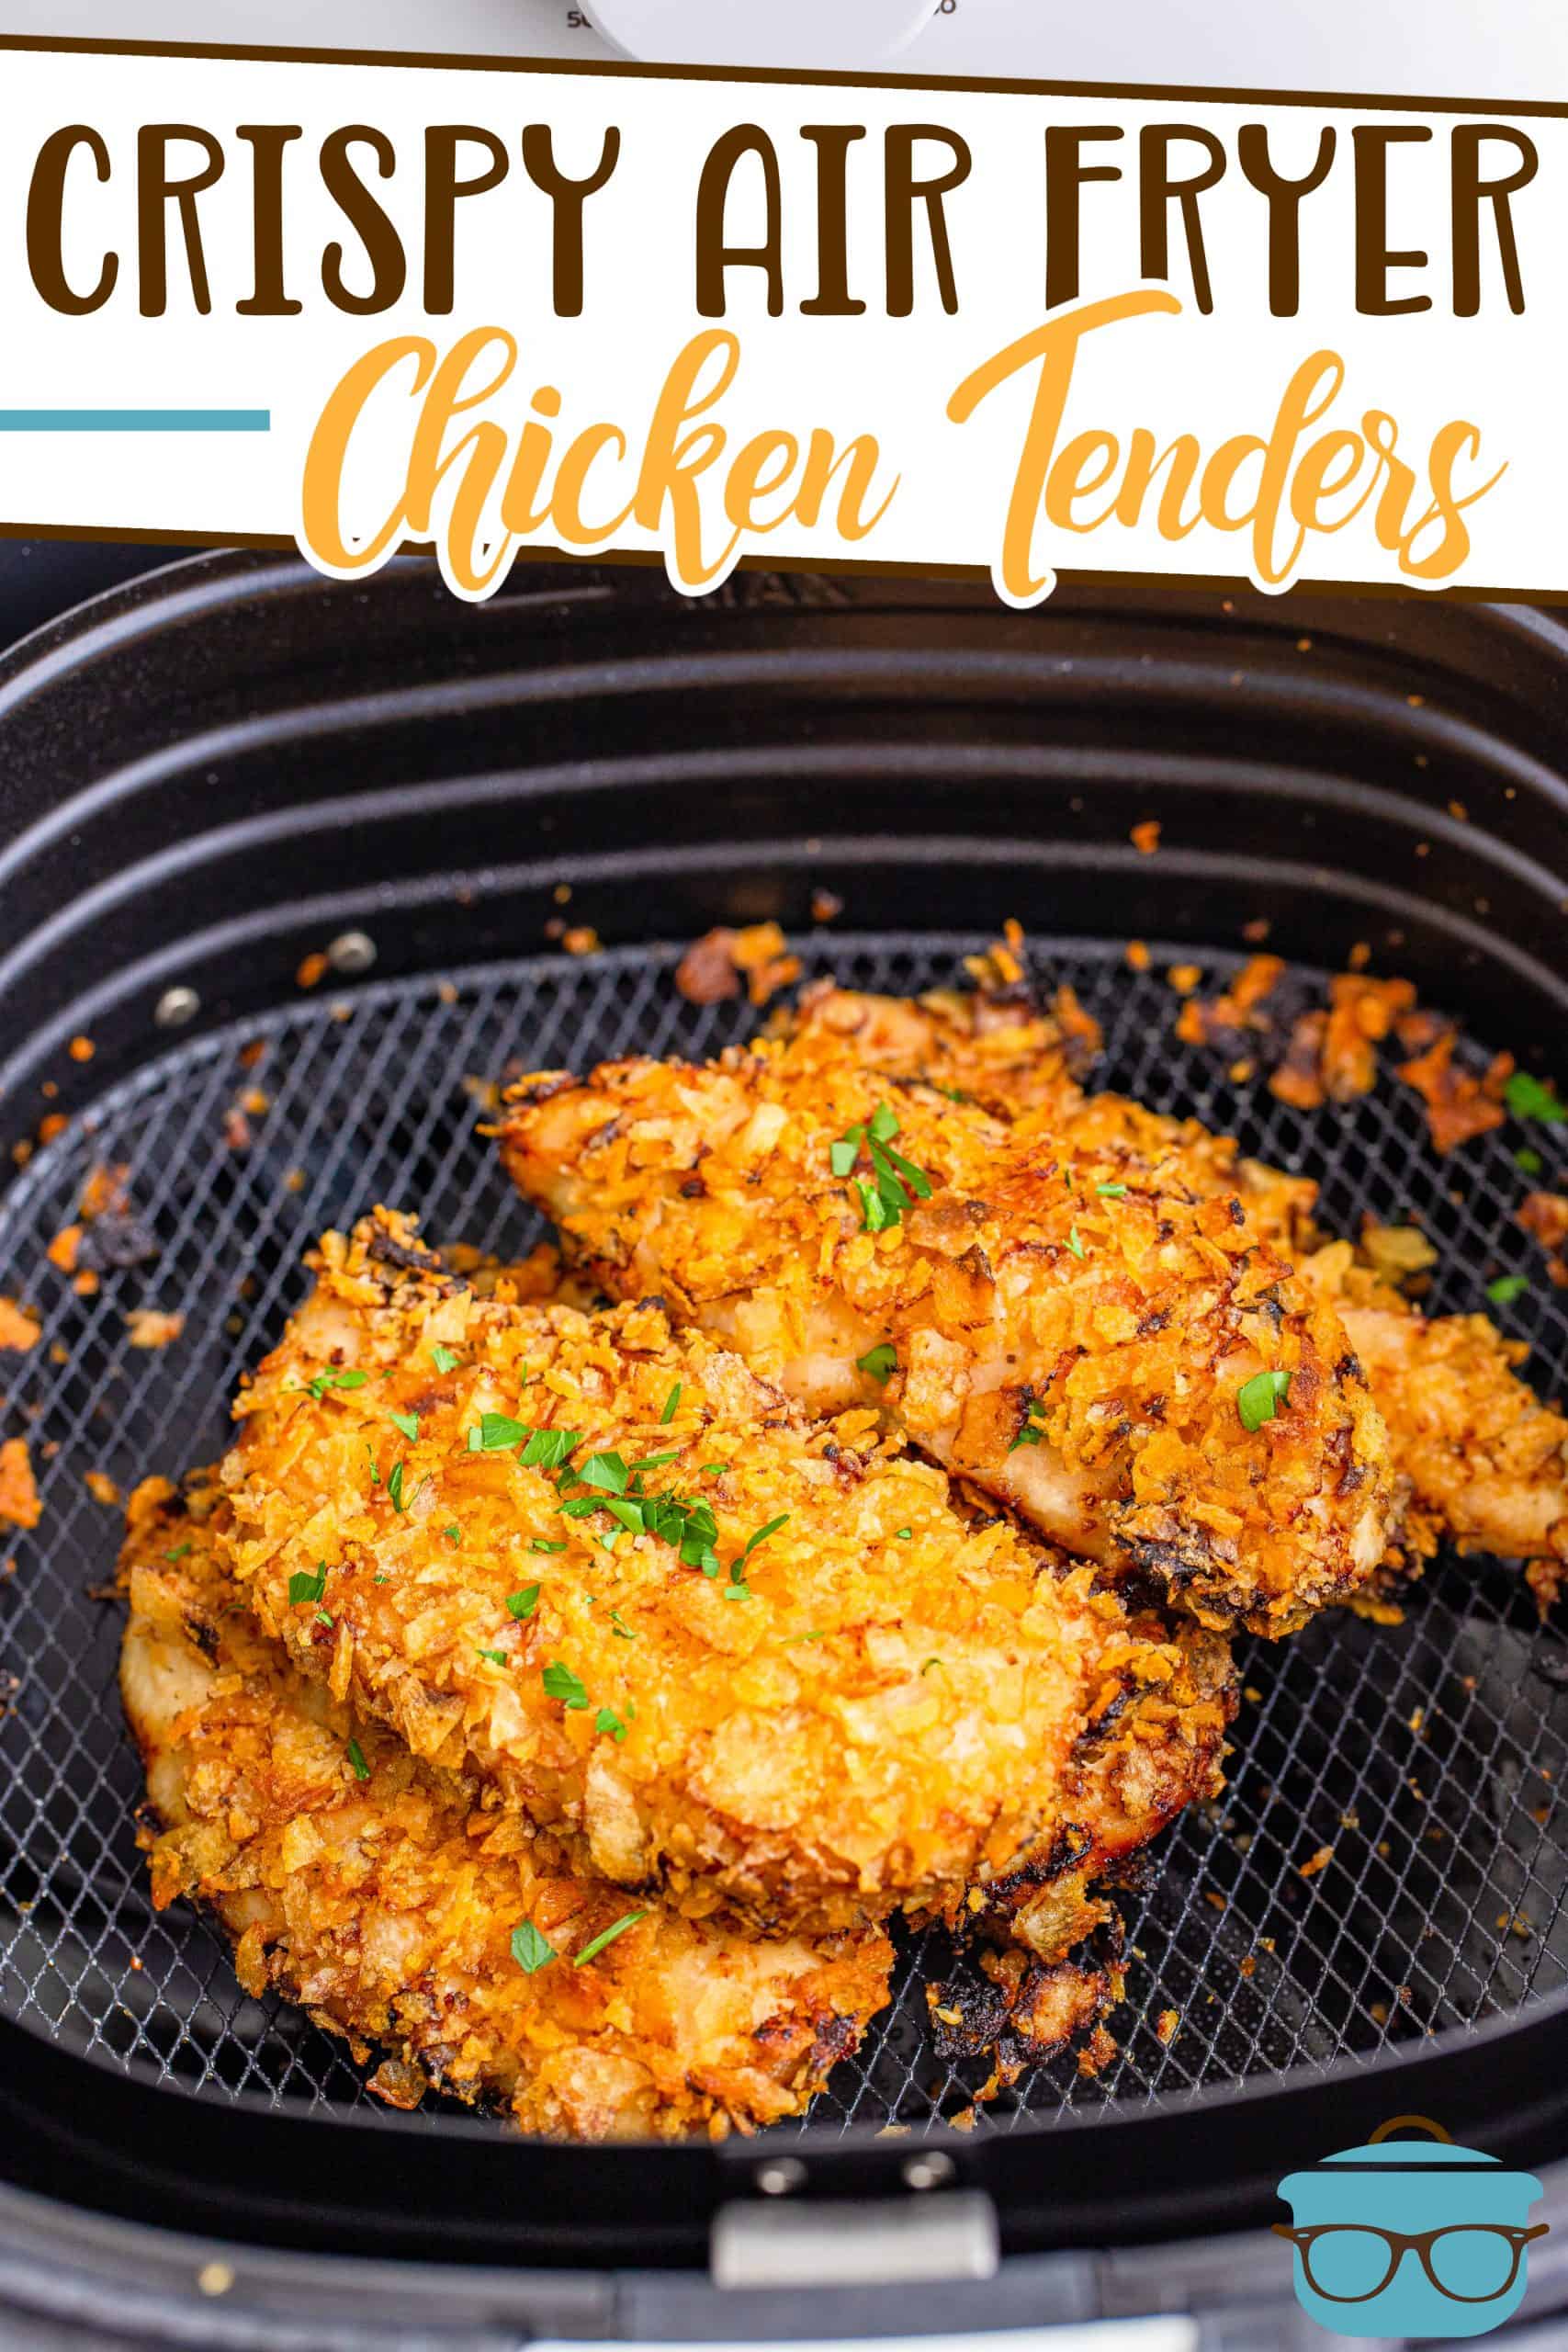 Crispy Air Fryer Chicken Tender recipe from The Country Cook, tenders shown in a black air fryer basket and topped with chopped parsley.